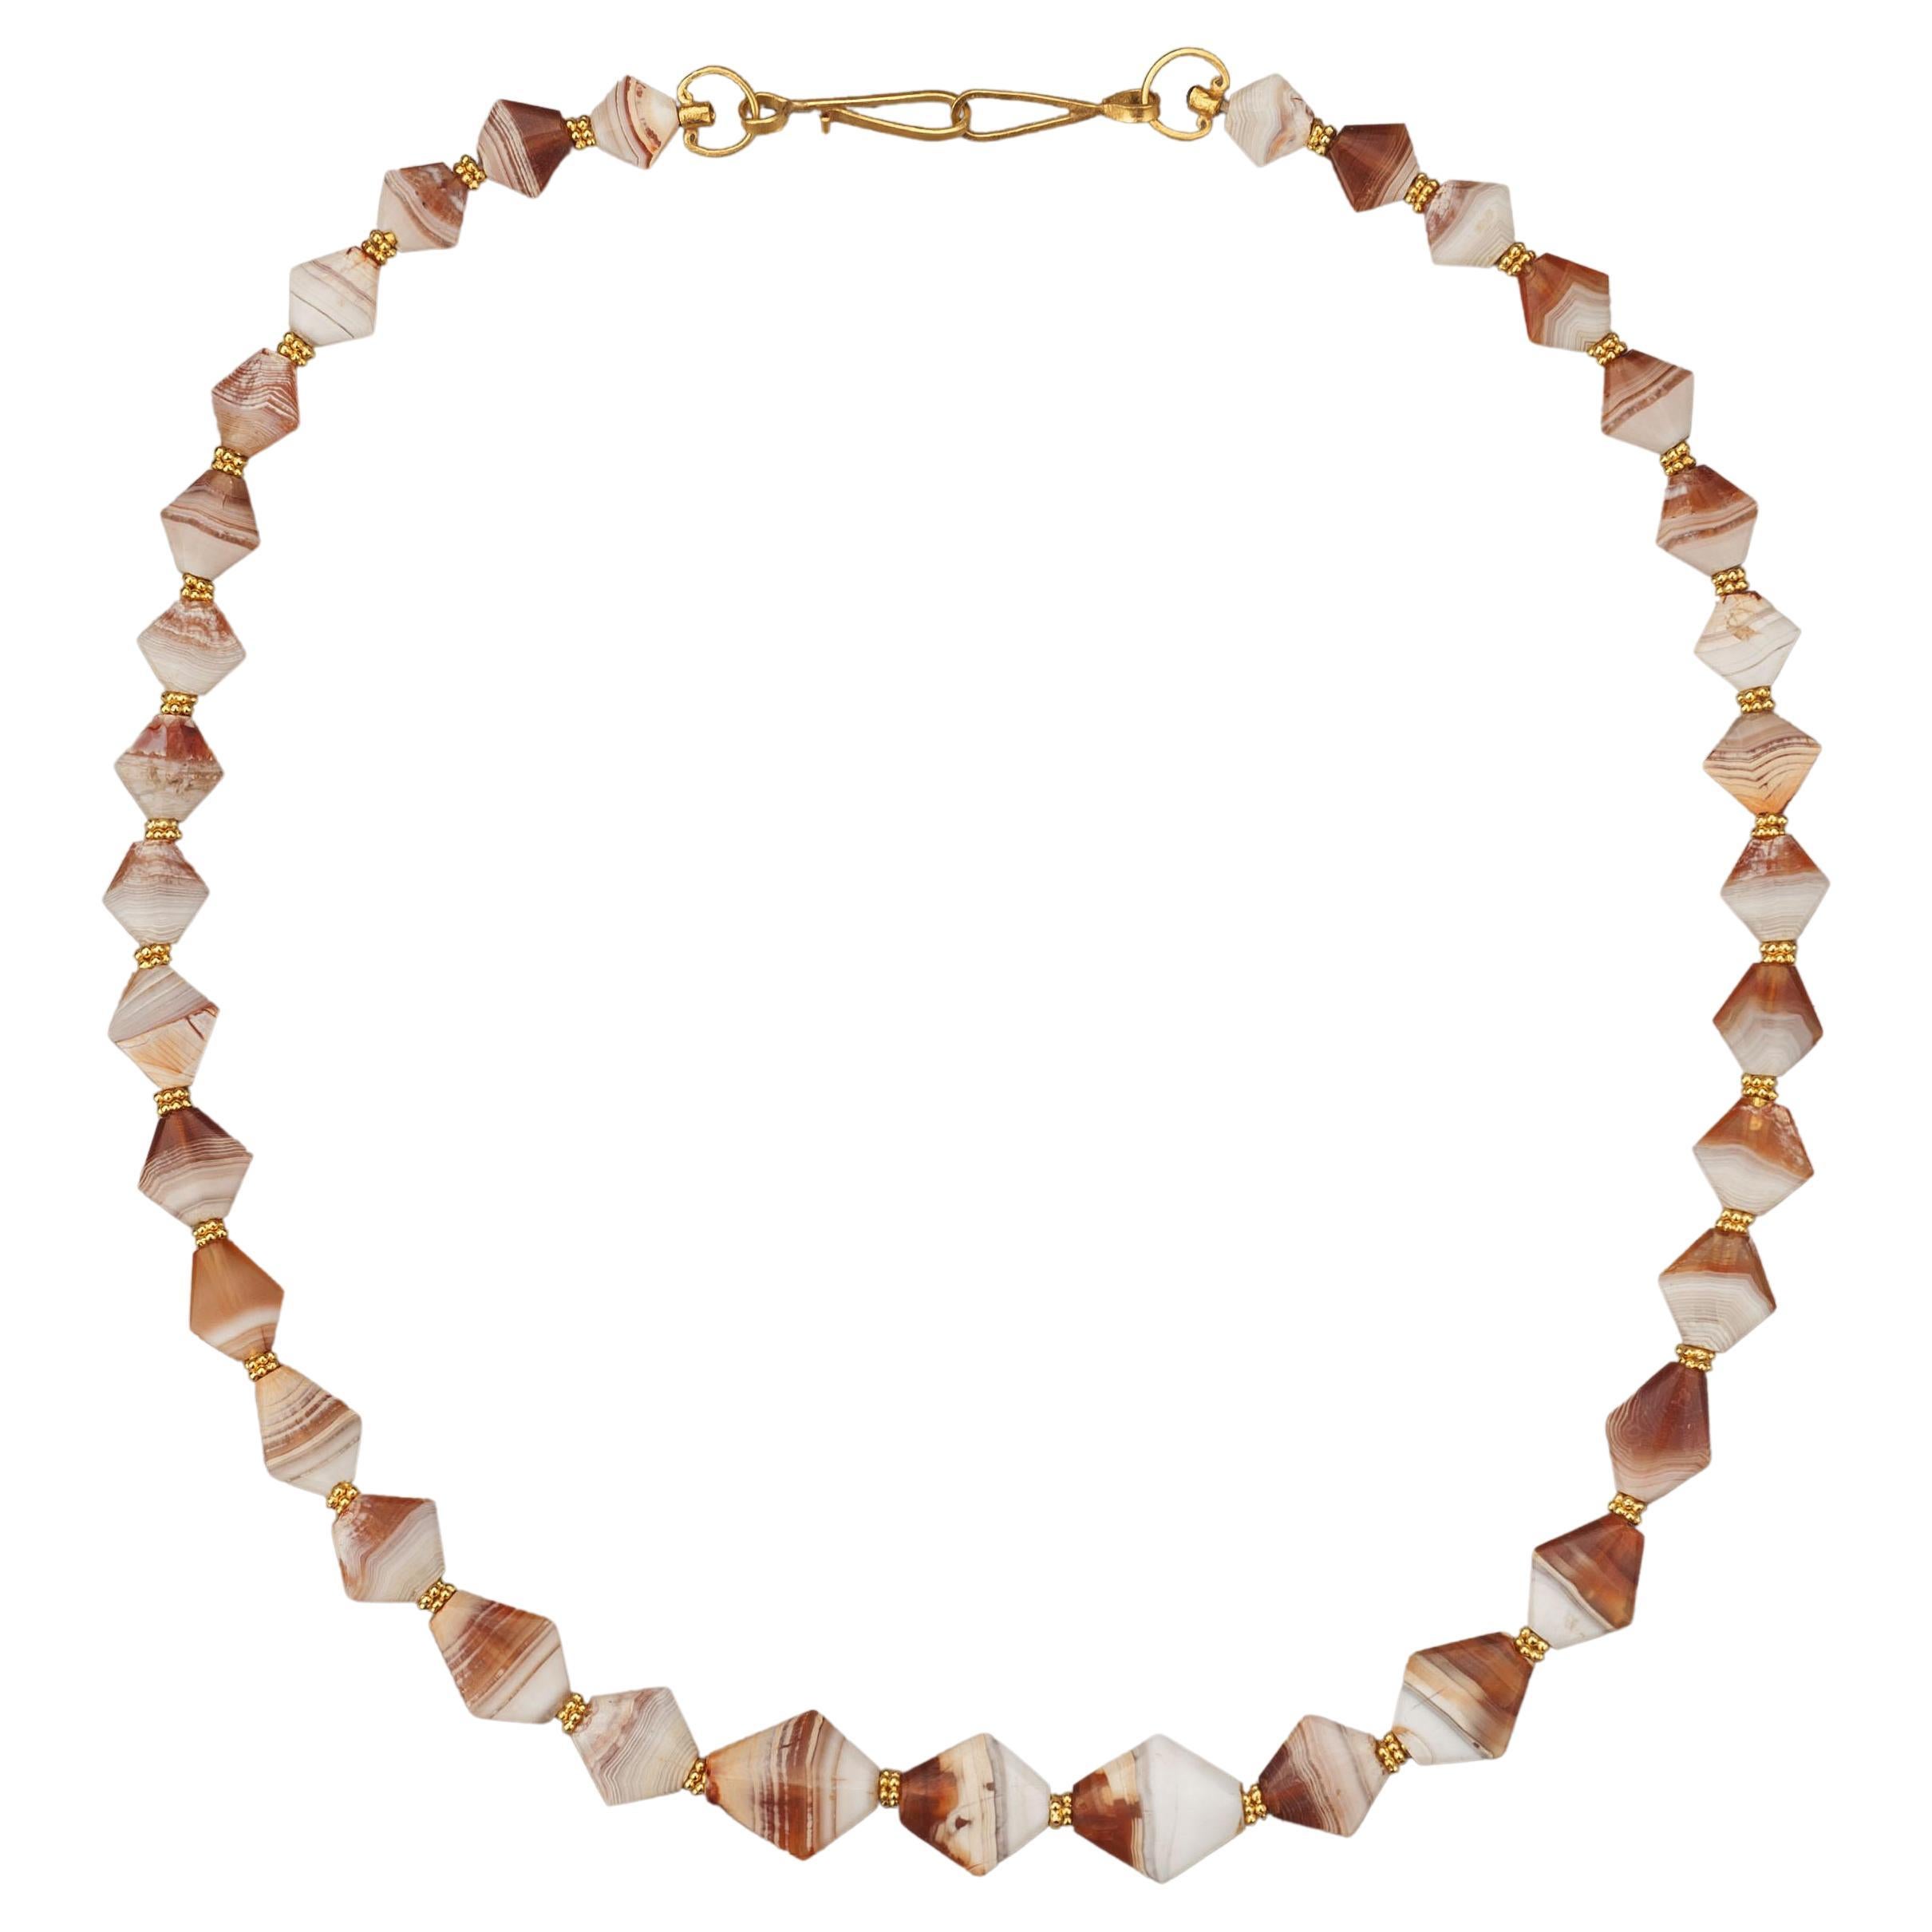 Ancient Sardonyx Rhombus Beads with 24k Granulated Gold Ring Beads and Clasp For Sale